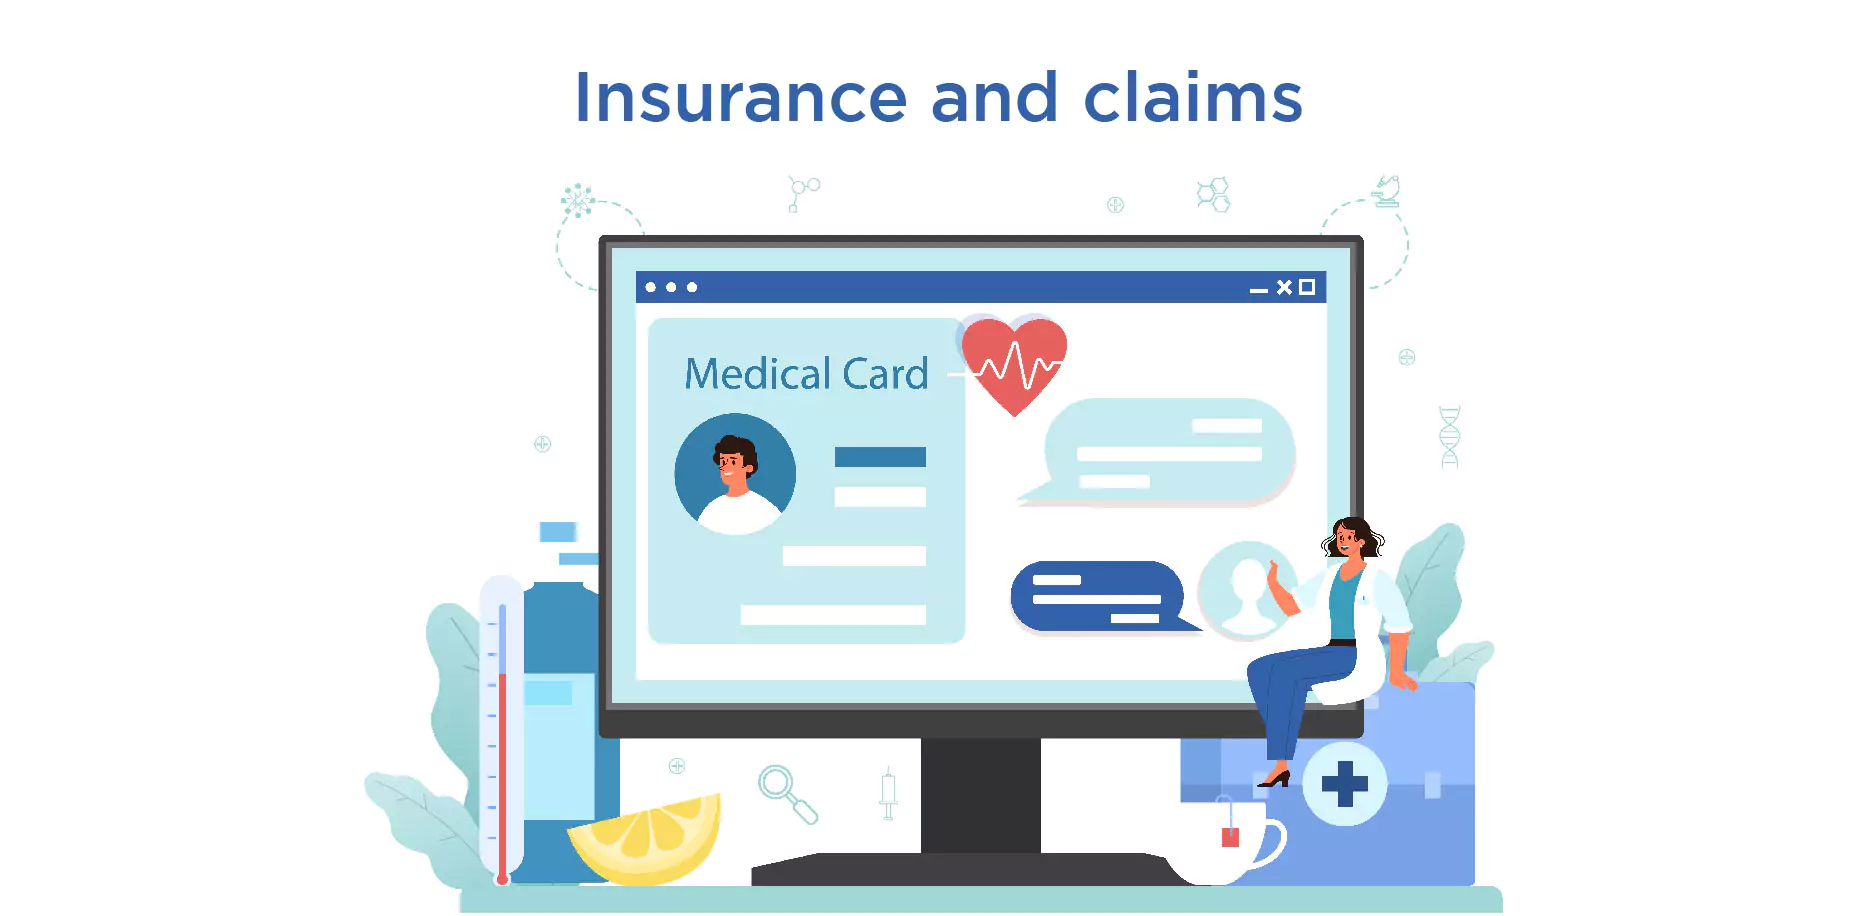  Insurance and claims